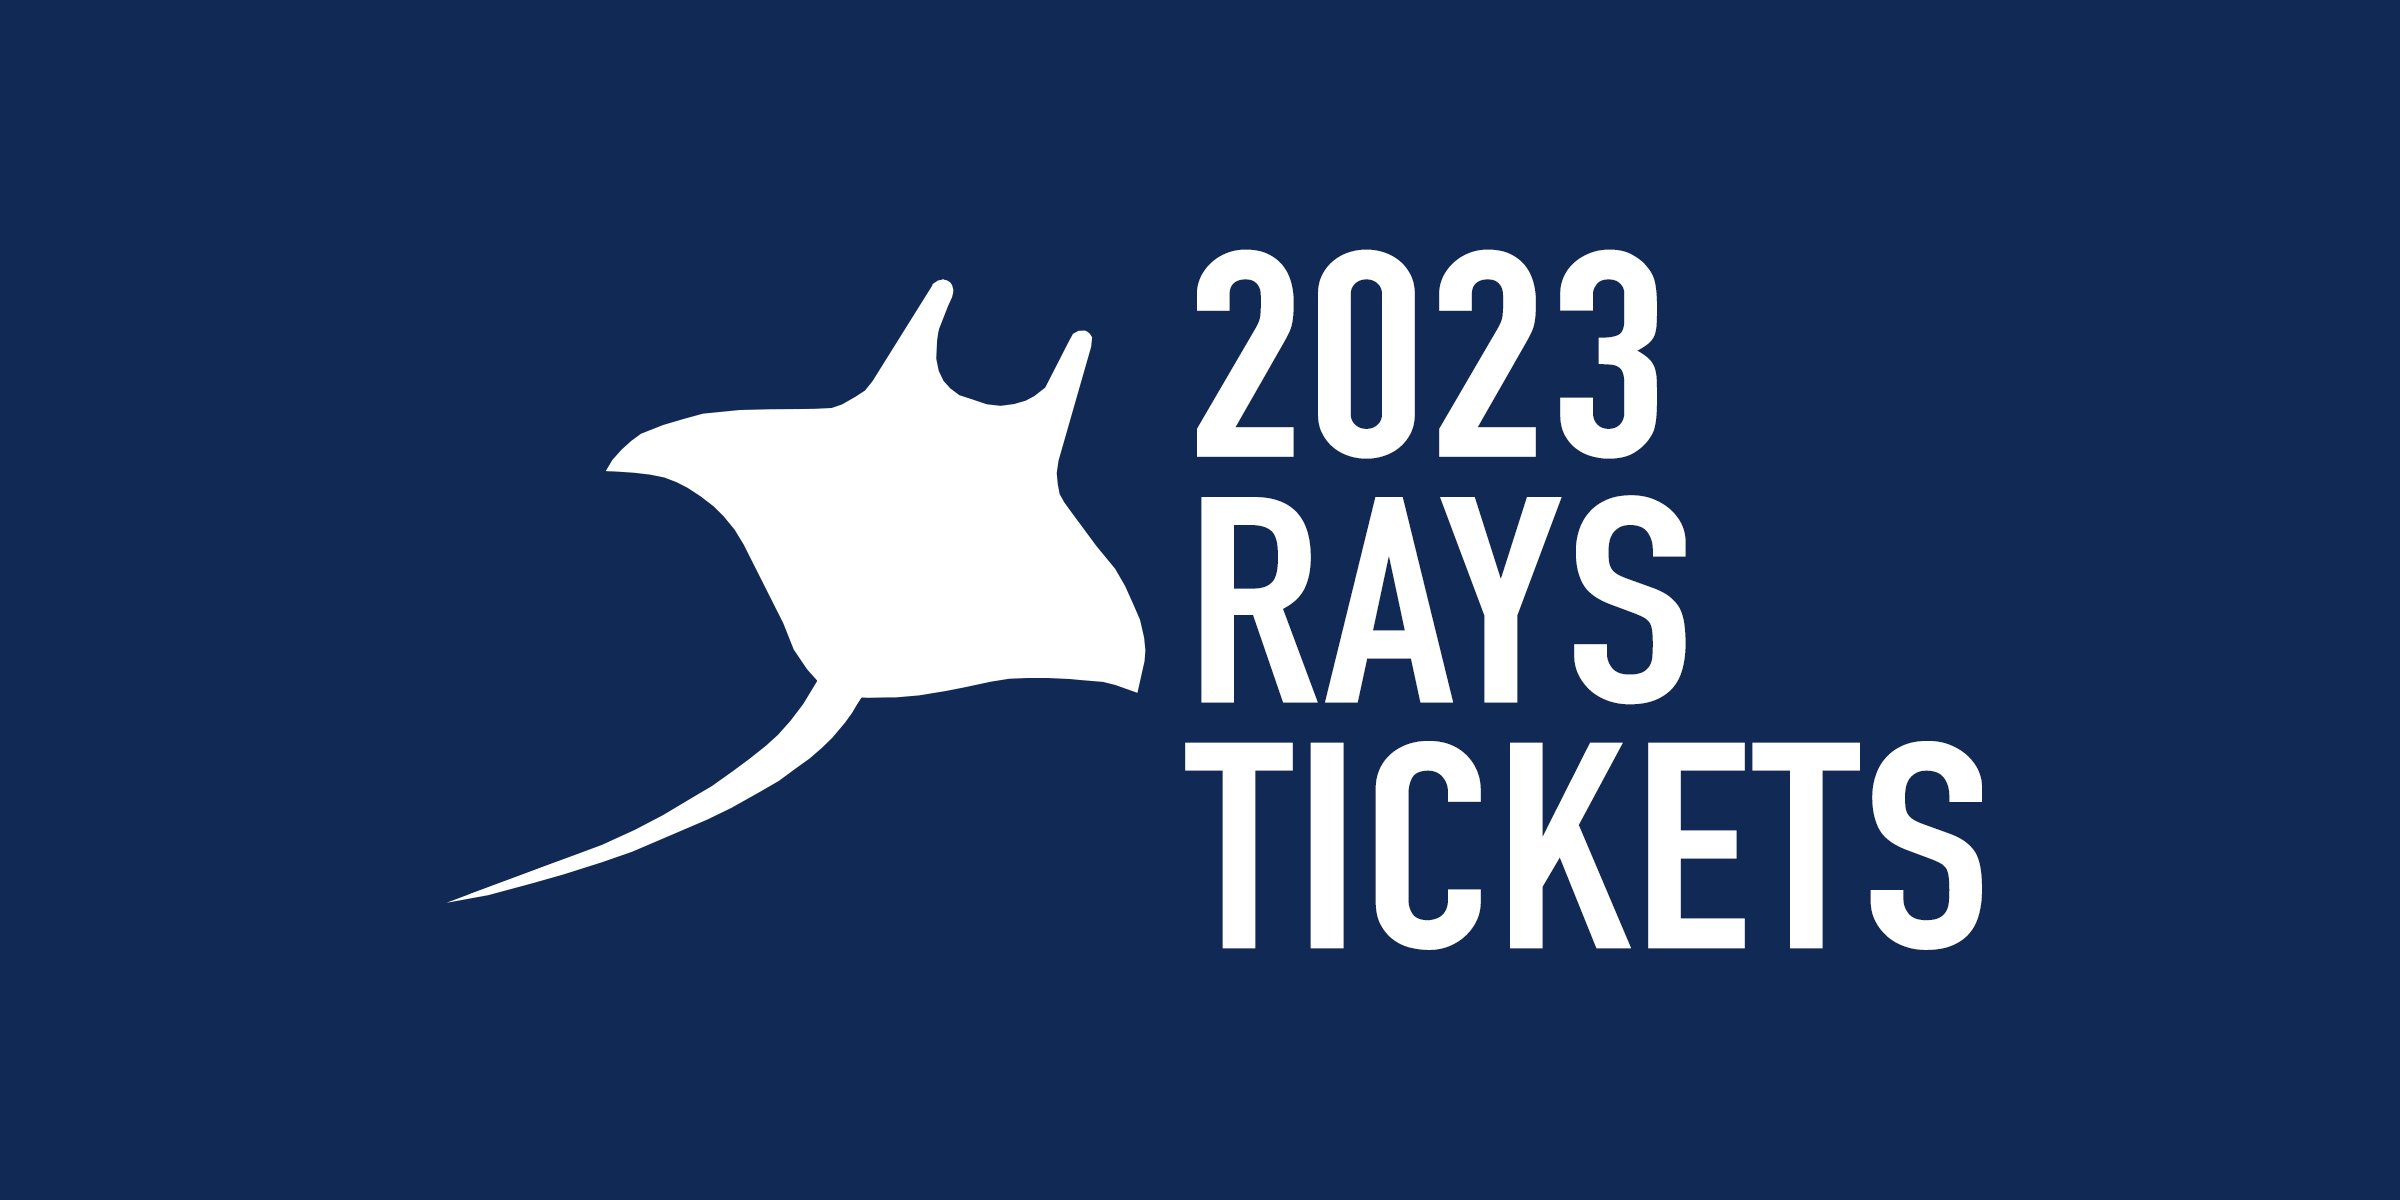 Tampa Bay Rays Tickets 2023 